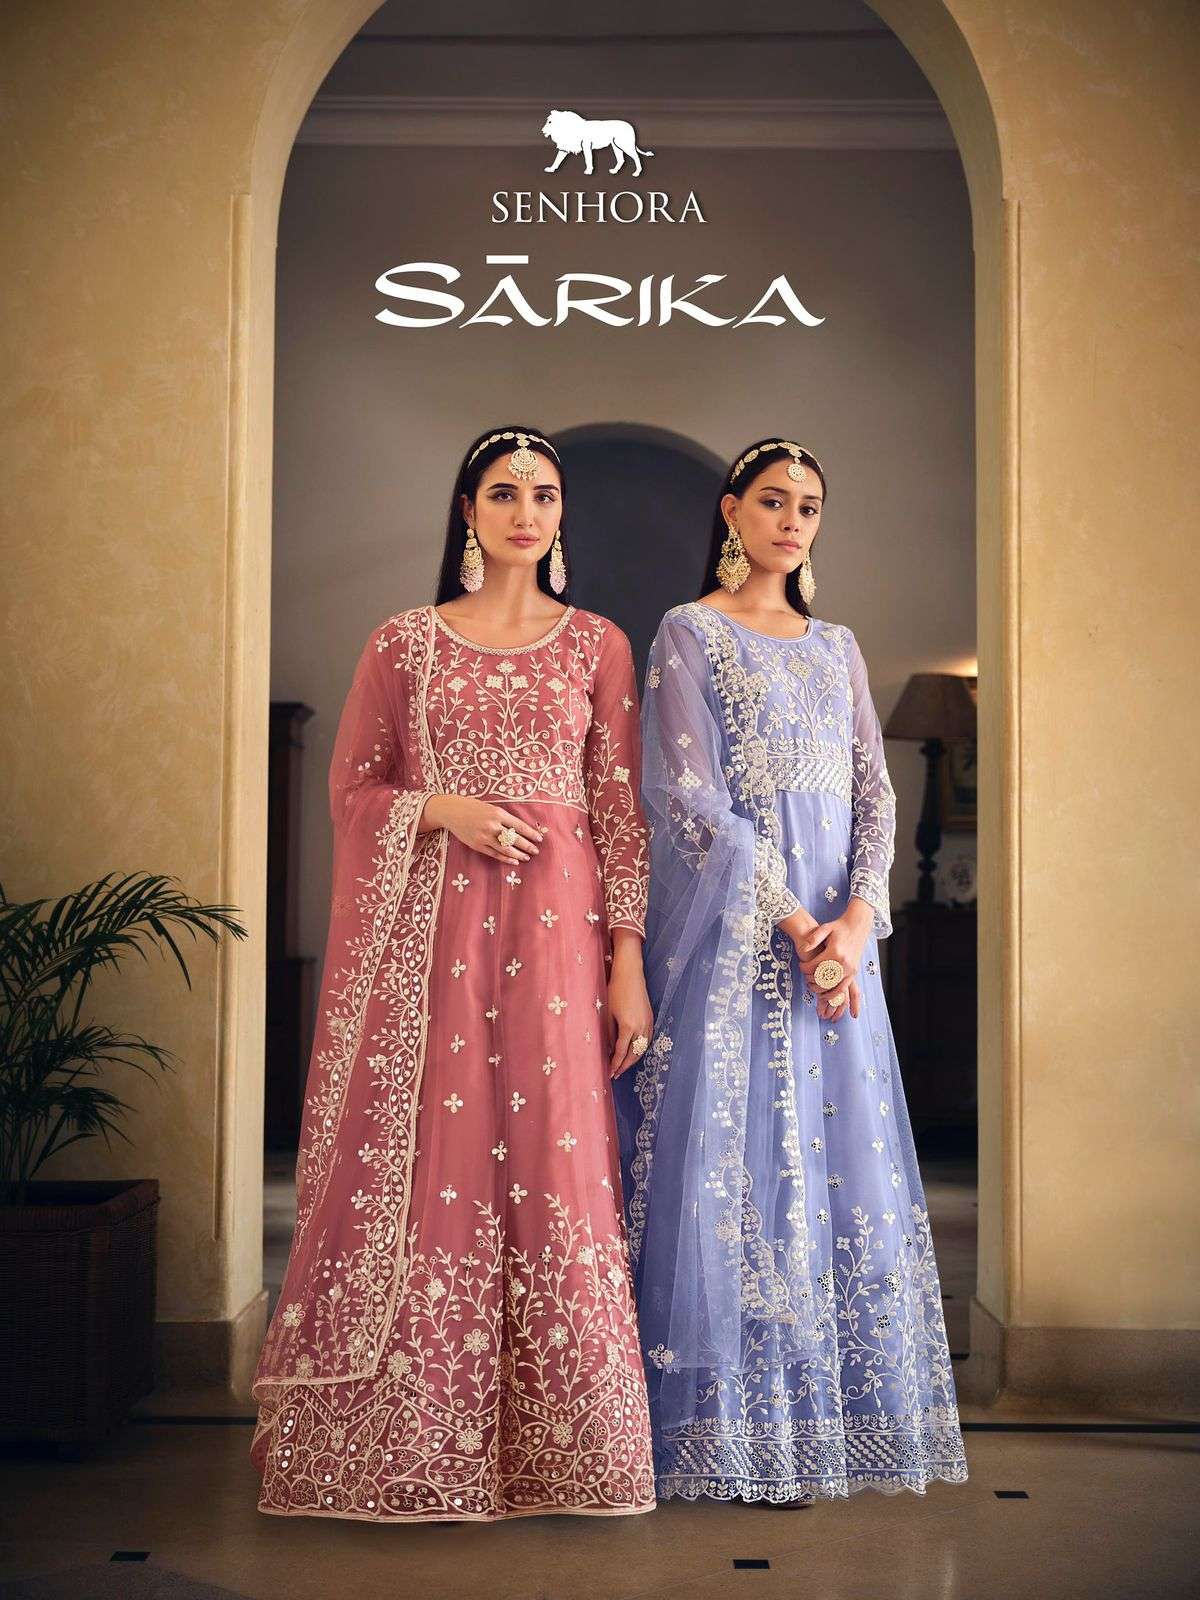 SARIKA BY SENHORA 3006 TO 3009 BUTTERFLY NET EMBROIDERY DRESSES